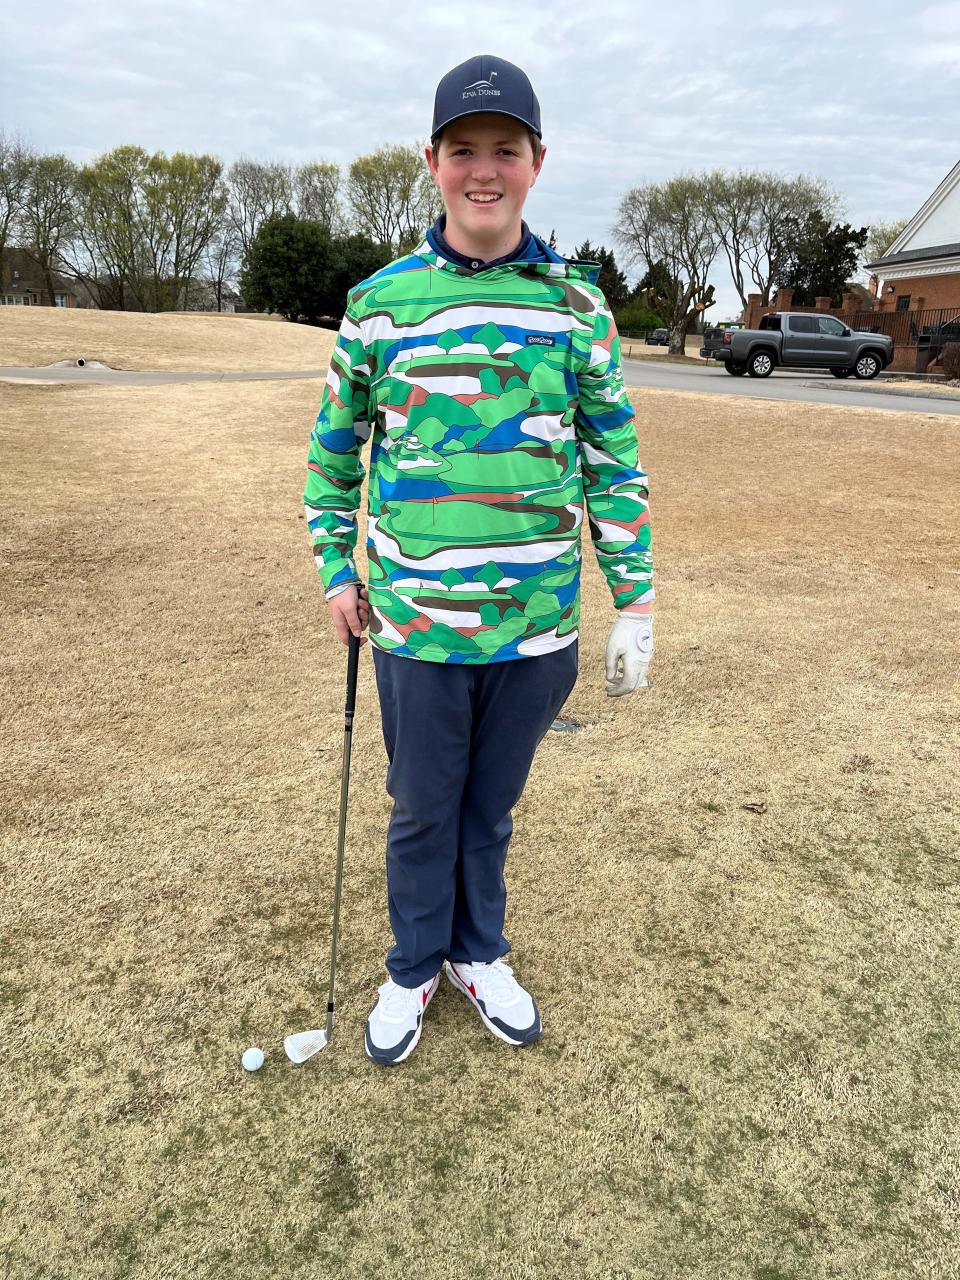 Jake Sheffield poses with his wedge at the Willow Creek Golf Club in Farragut on March 9. The 14-year-old will compete in the national finals of the Drive, Chip and Putt competition at Augusta National Golf Club on April 2.